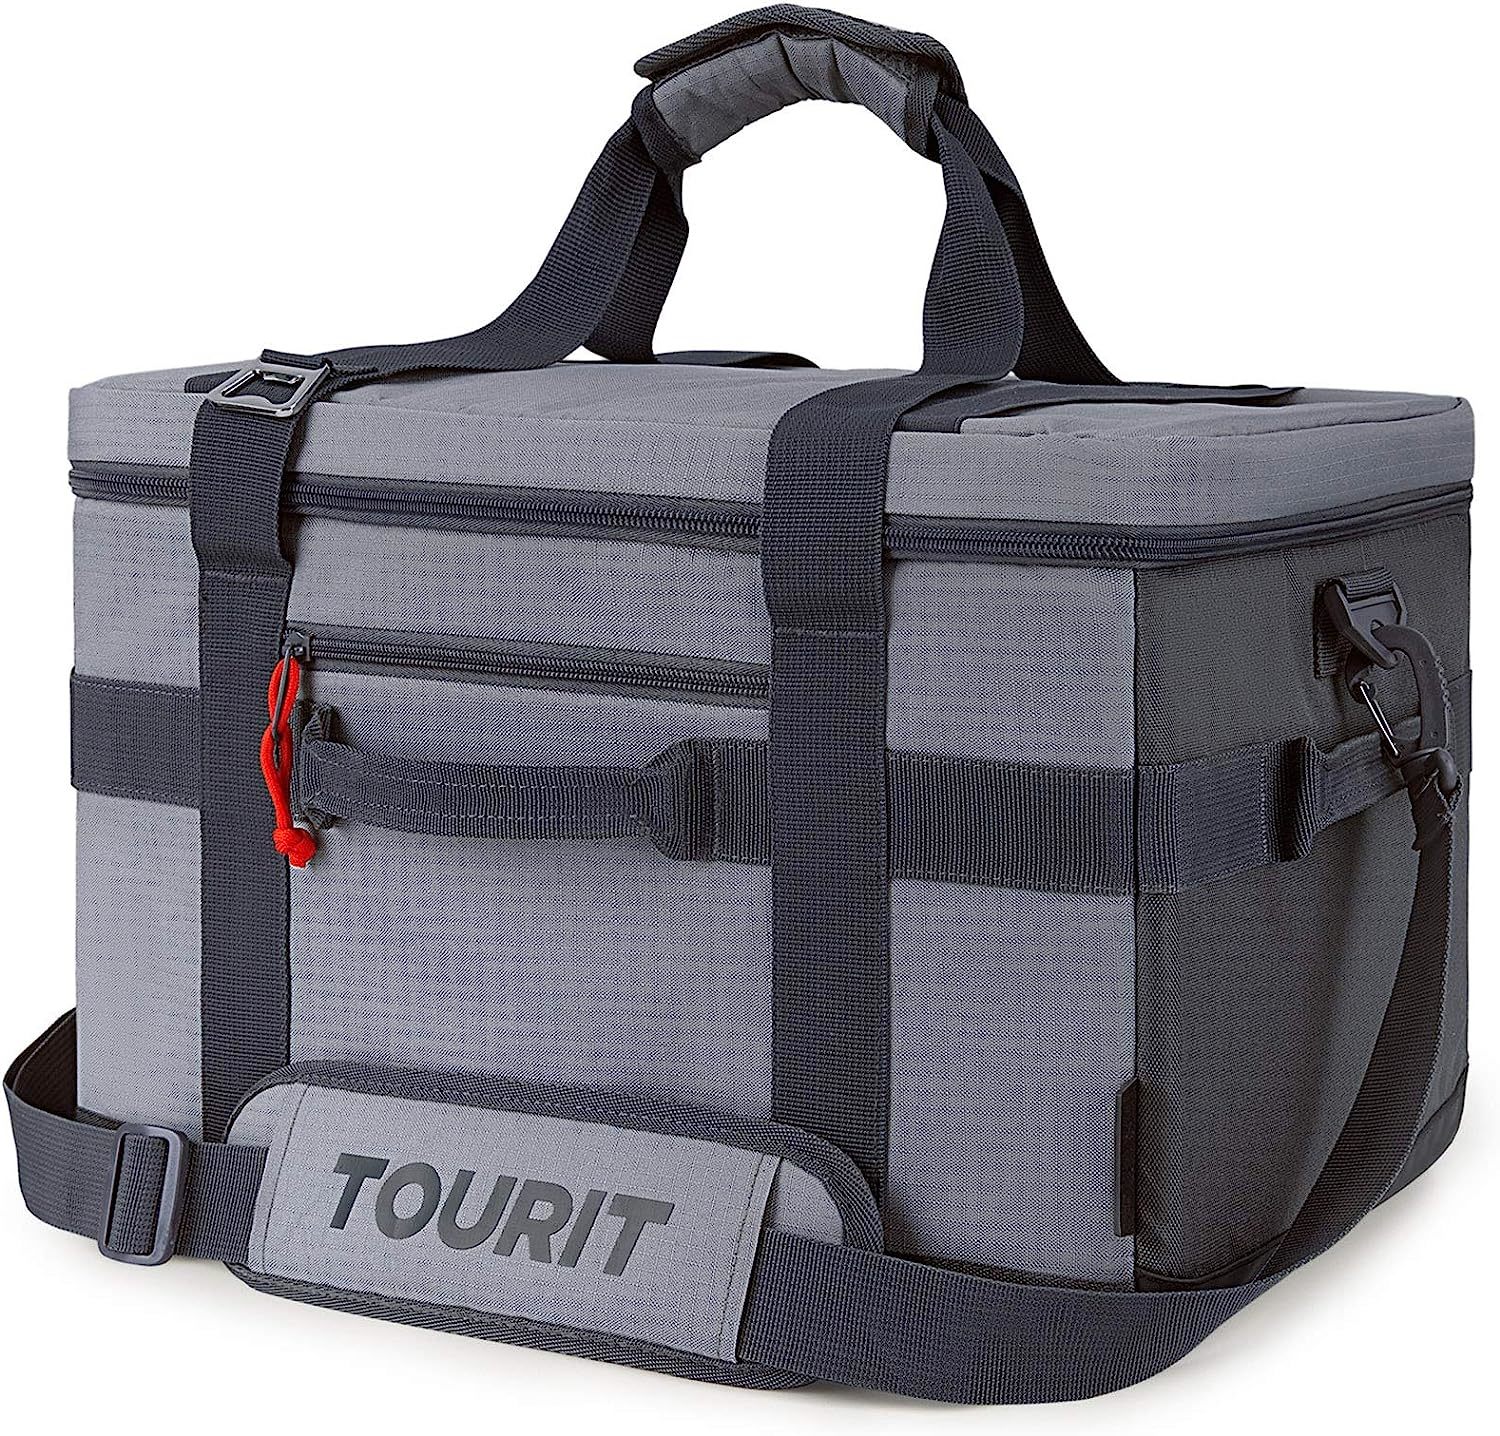 Tourit Cooler Bag 48/60 Cans Insulated Soft and 50 similar items